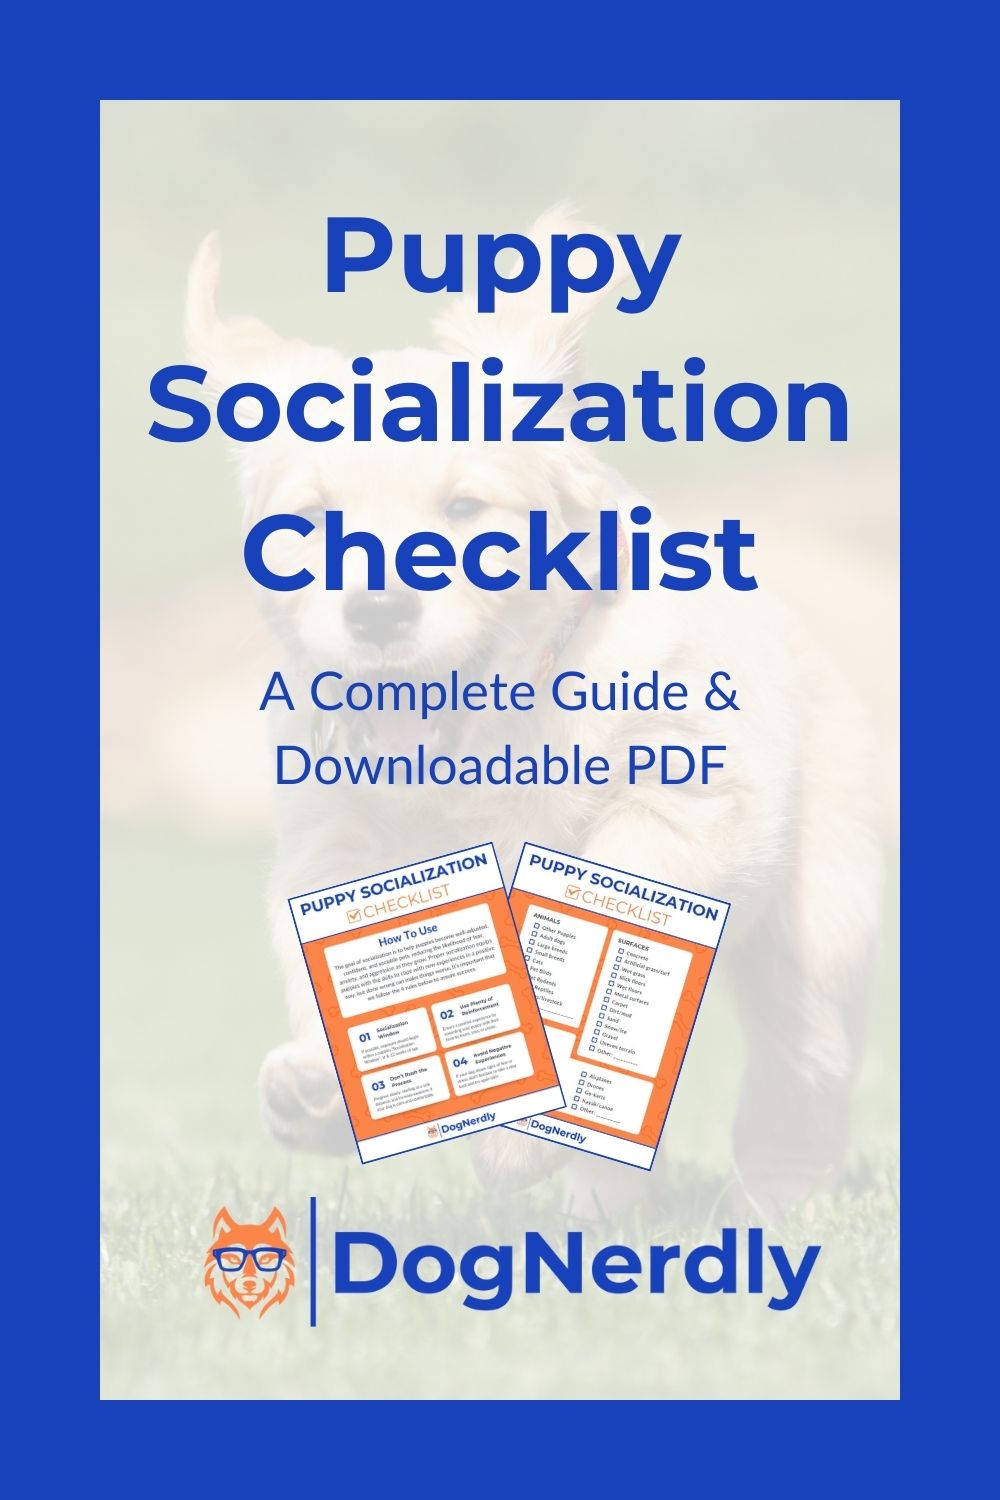 Puppy Socialization Checklist: A Full Guide and Printable PDF